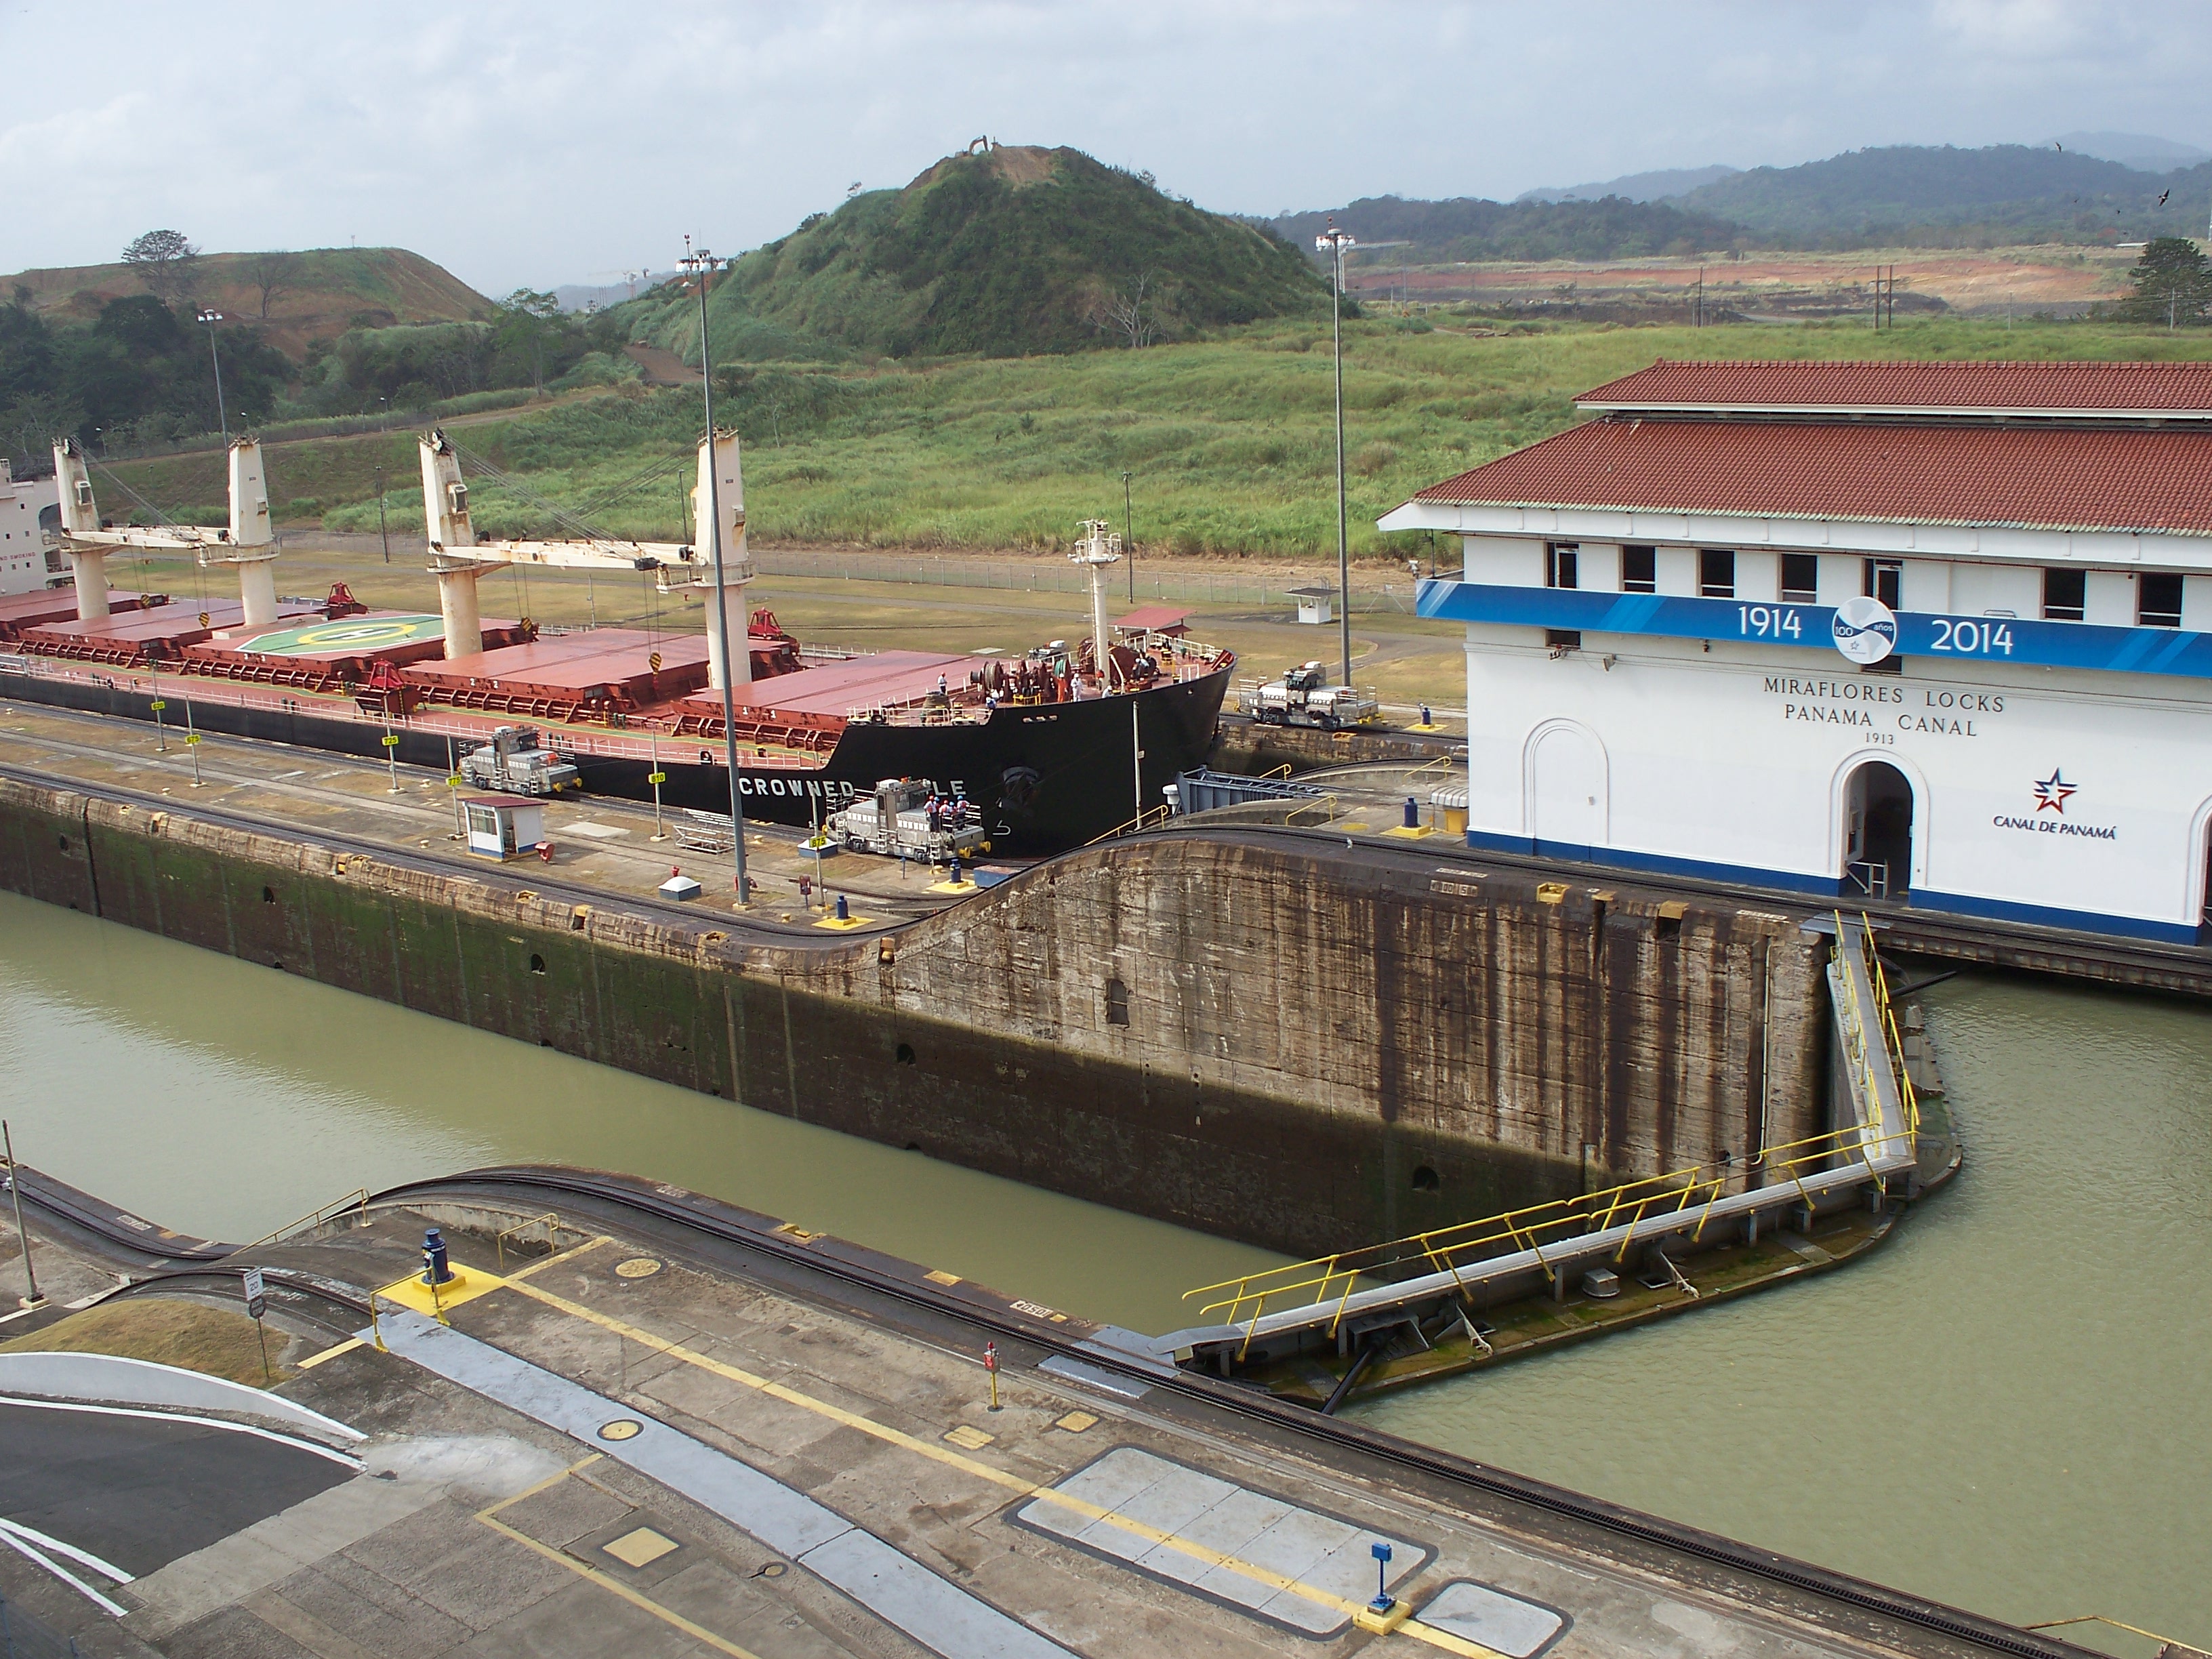 There are three sets of locks on the Panama Canal. Miraflores are the ones closest to the Pacific side. In the background, work continues on the new Canal path.